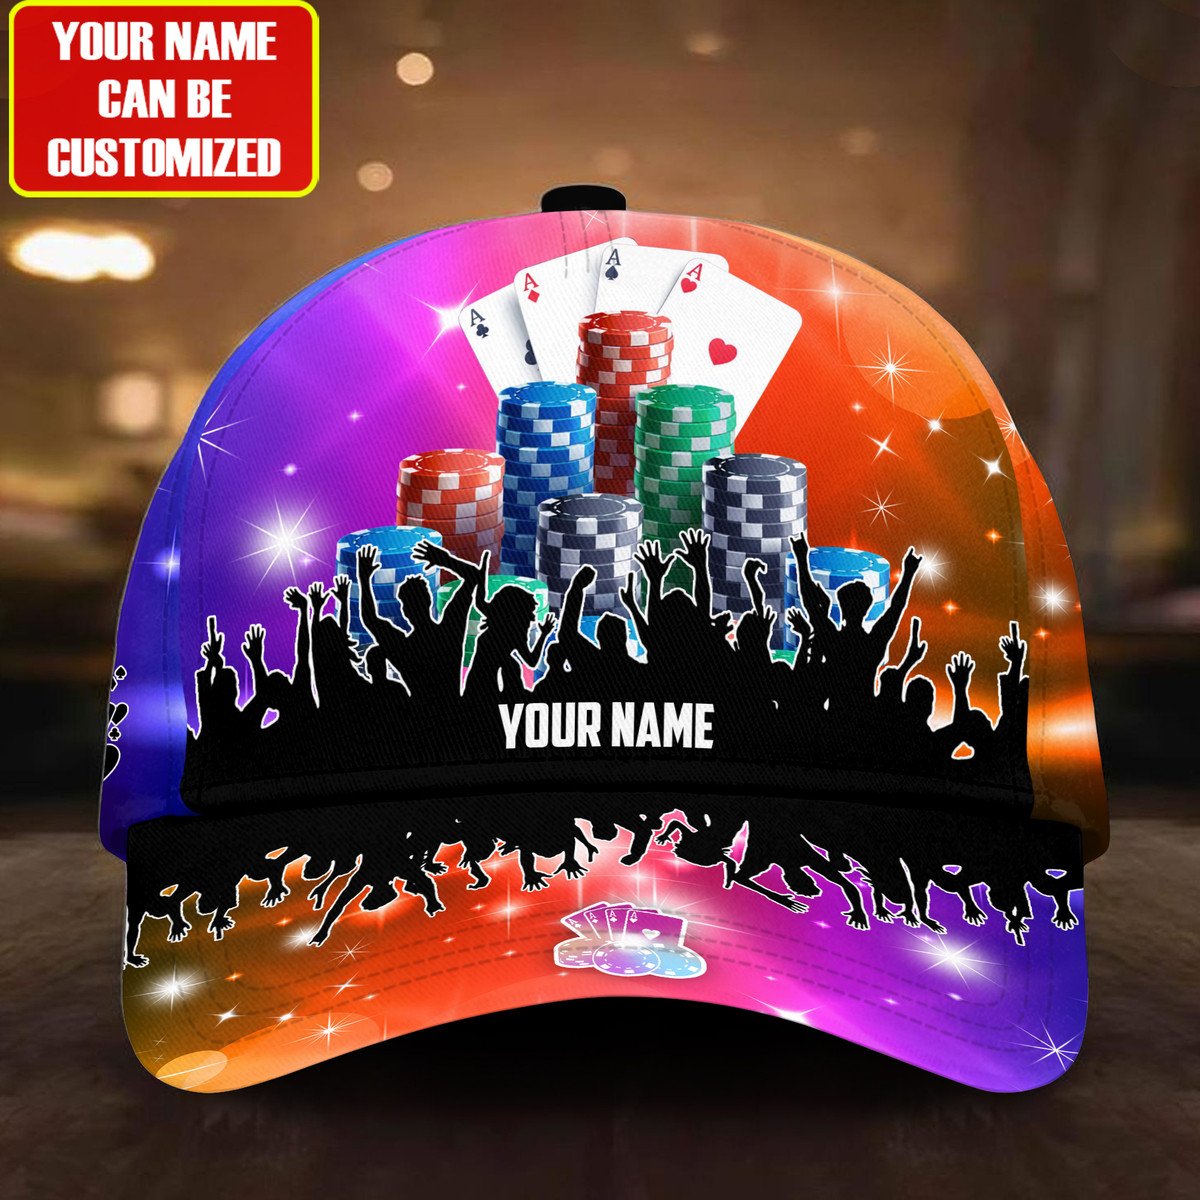 Personalized Name Poker Color Classic Cap/ Casino Poker Hat/ Idea Gift for Poker Player